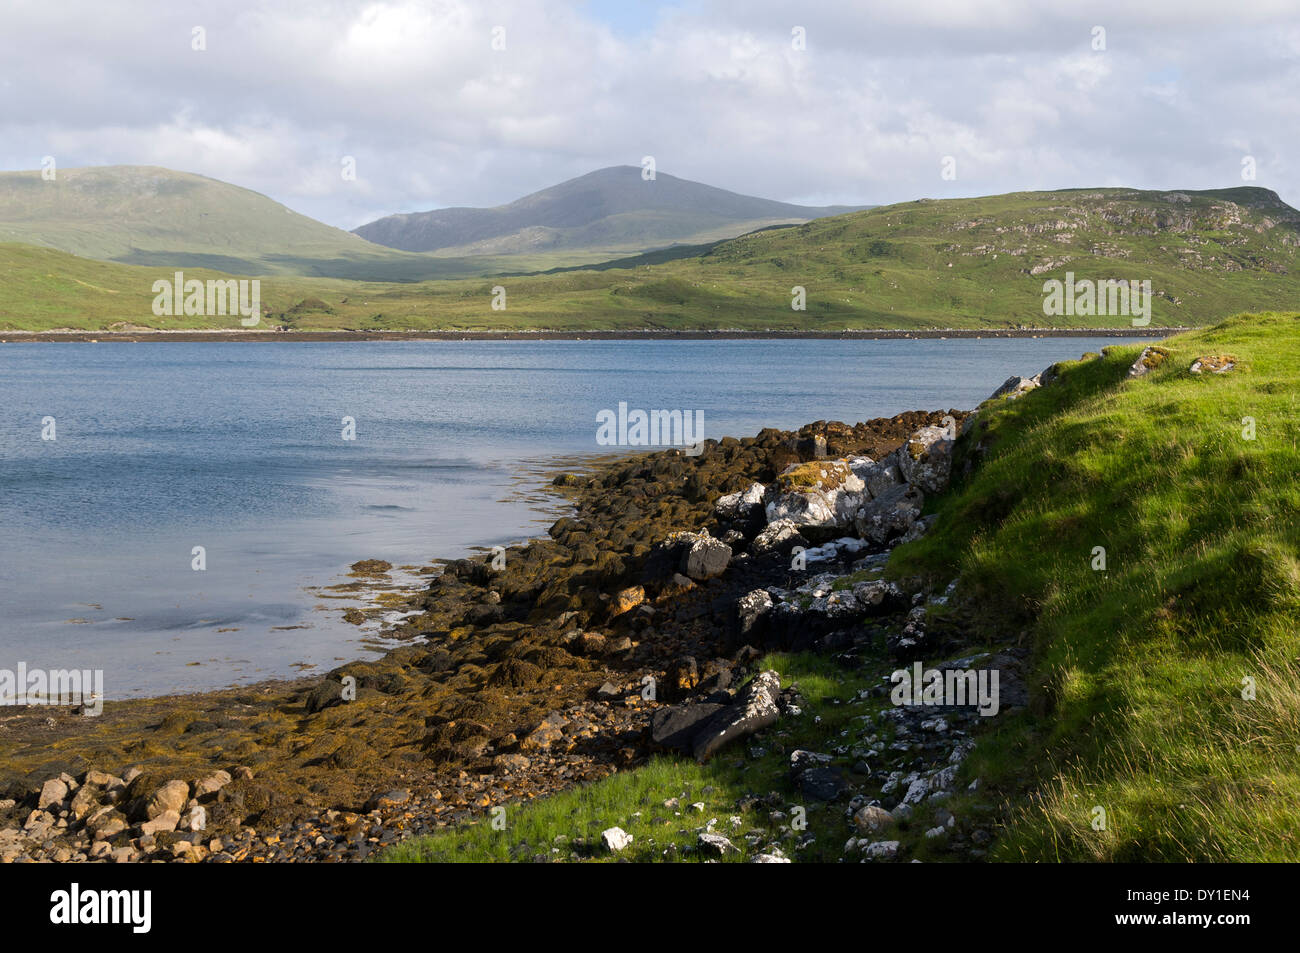 The hills of Pairc (Park) over Loch Seaforth, from Port Grigaspul, Isle of Lewis, Western Isles, Scotland, UK. Stock Photo